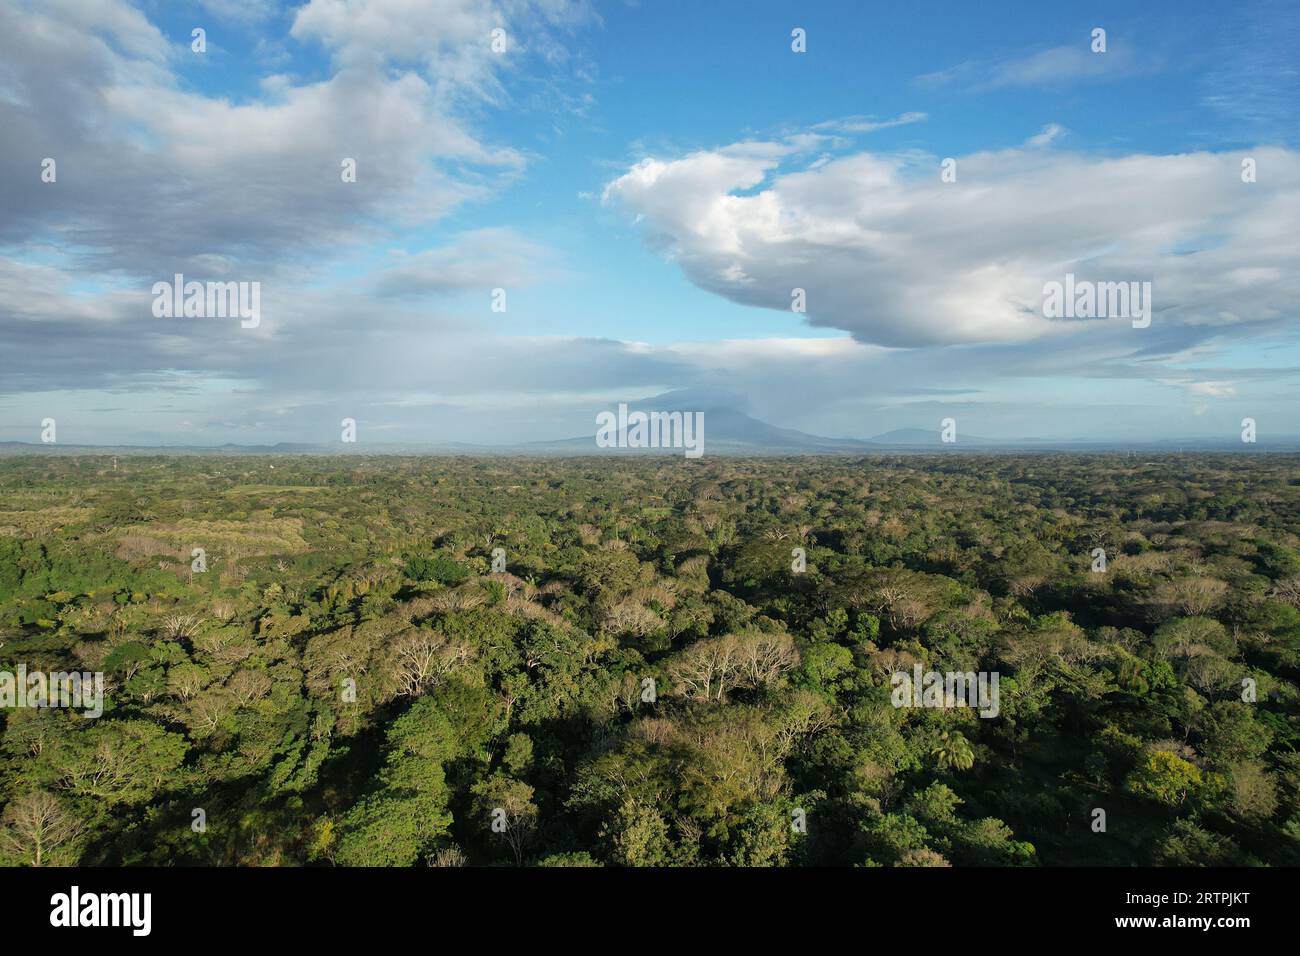 Tropical central america landscape with volcano aerial drone view Stock Photo